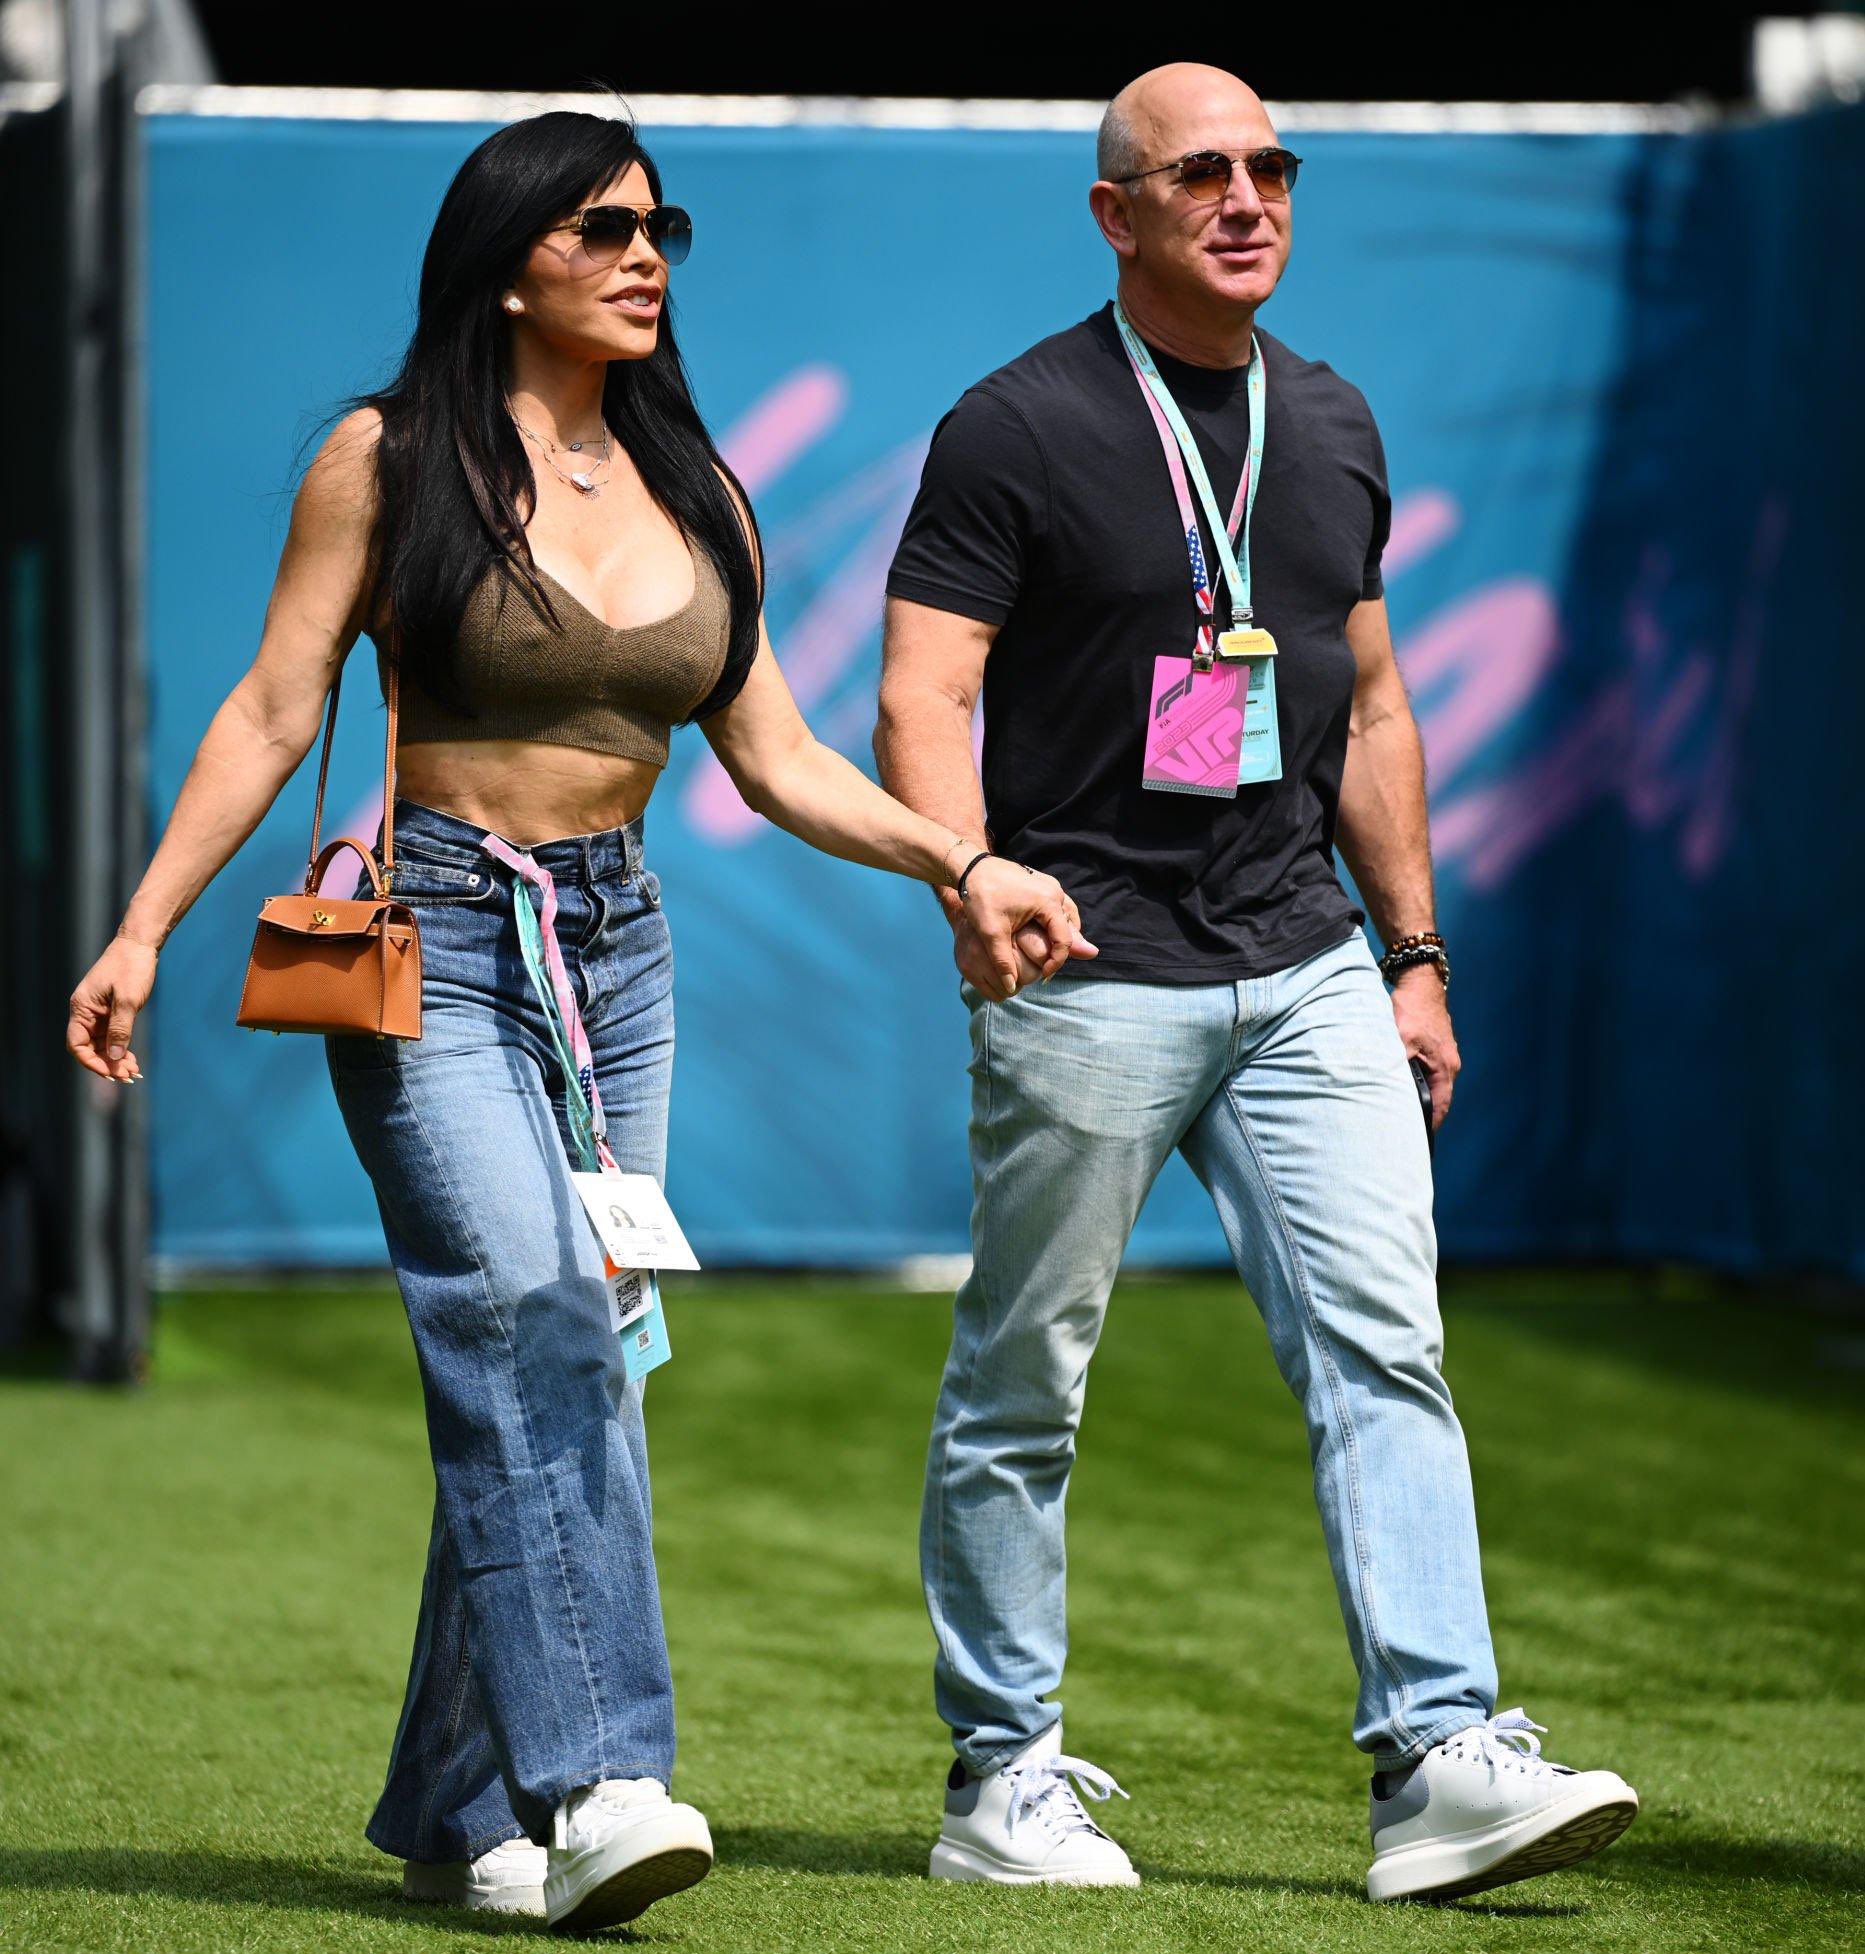 Lauren Sanchez Has A Nip Slip After Being Proposed To By Jeff Bezos Page 2 Of 5